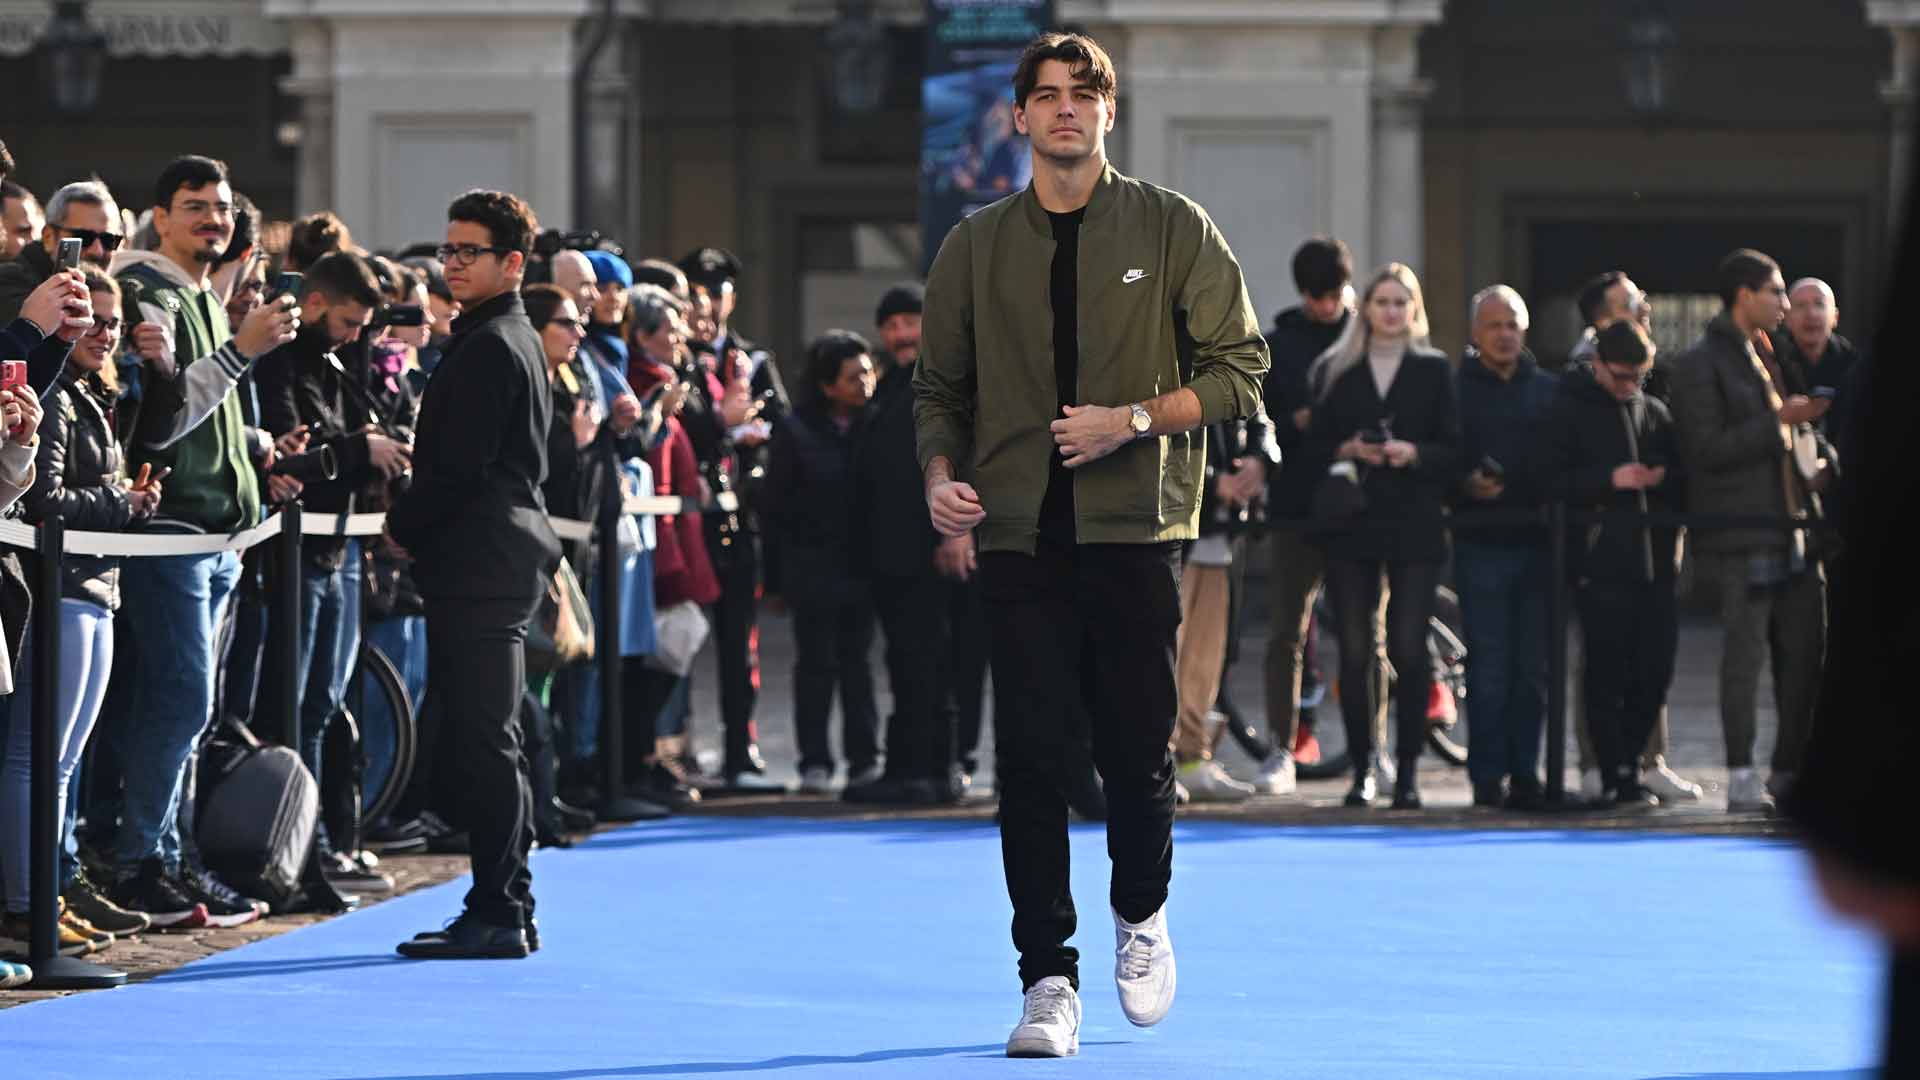 Taylor Fritz in Turin, Italy for the 2022 Nitto ATP Finals.